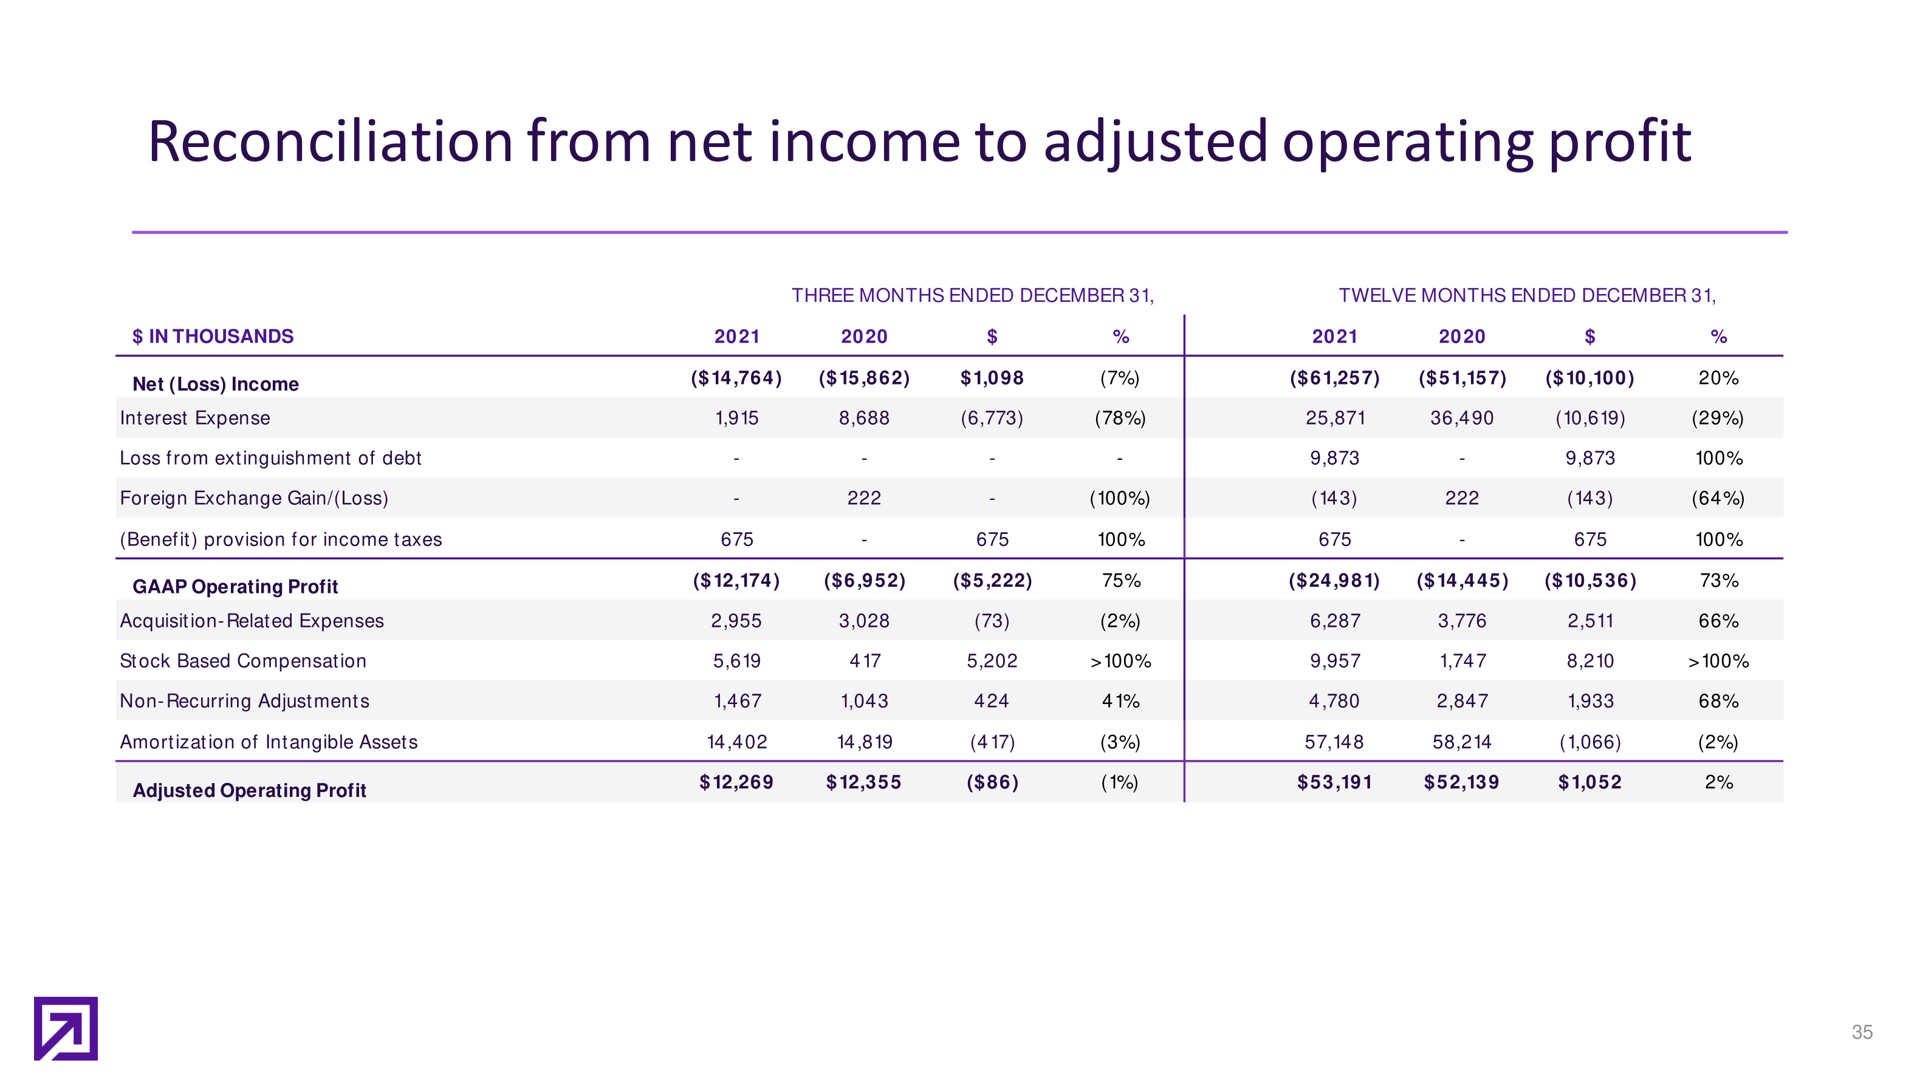 reconciliation from net income to adjusted operating profit | Definitive Healthcare